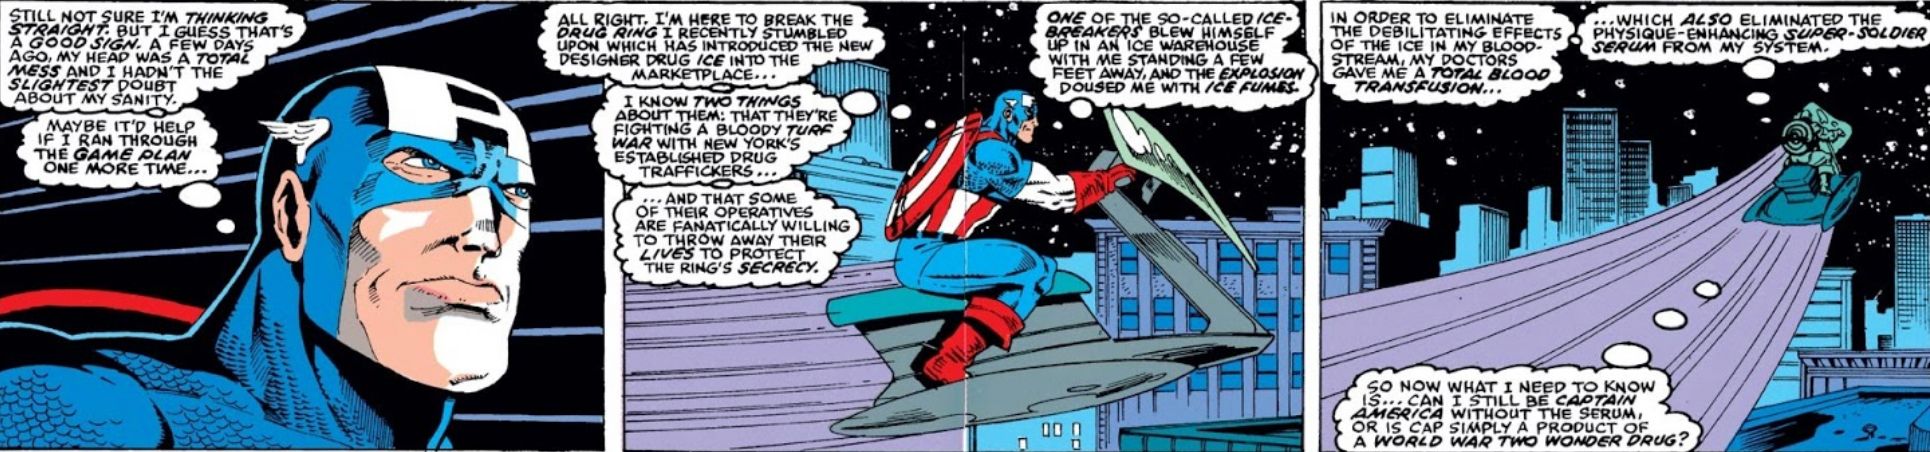 Captain America Contemplates Being A Hero Without The Super Soldier Serum in Issue 378